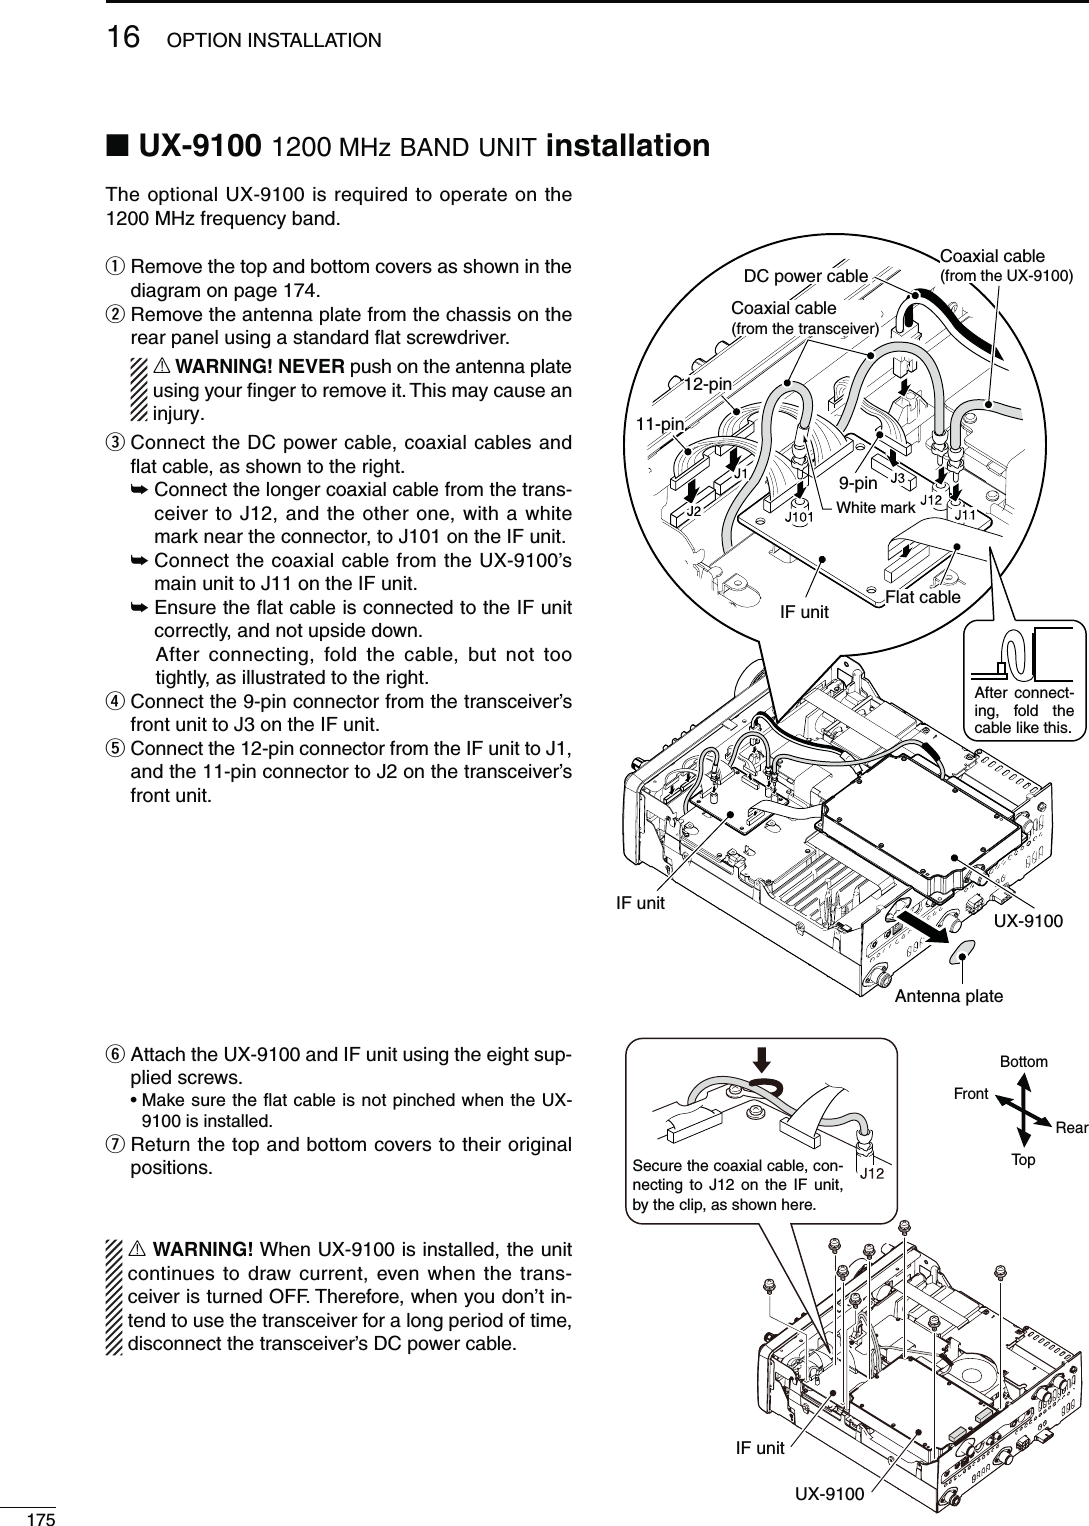 17516 OPTION INSTALLATIONN UX-9100 1200 MHz BAND UNIT INSTALLATIONThe optional UX-9100 is required to operate on the 1200 MHz frequency band.q  Remove the top and bottom covers as shown in the diagram on page 174.w  Remove the antenna plate from the chassis on the rear panel using a standard ﬂat screwdriver. R WARNING! NEVER push on the antenna plate using your ﬁnger to remove it. This may cause an injury.e  Connect the DC power cable, coaxial cables and ﬂat cable, as shown to the right. ±  Connect the longer coaxial cable from the trans-ceiver to J12, and the other one, with a white mark near the connector, to J101 on the IF unit. ±  Connect the coaxial cable from the UX-9100’s main unit to J11 on the IF unit. ±  Ensure the ﬂat cable is connected to the IF unit correctly, and not upside down.   After connecting, fold the cable, but not too tightly, as illustrated to the right.r  Connect the 9-pin connector from the transceiver’s front unit to J3 on the IF unit.t  Connect the 12-pin connector from the IF unit to J1, and the 11-pin connector to J2 on the transceiver’s front unit.y  Attach the UX-9100 and IF unit using the eight sup-plied screws. s-AKESURETHEmATCABLEISNOTPINCHEDWHENTHE589100 is installed.u  Return the top and bottom covers to their original positions.R WARNING! When UX-9100 is installed, the unit continues to draw current, even when the trans-ceiver is turned OFF. Therefore, when you don’t in-tend to use the transceiver for a long period of time, disconnect the transceiver’s DC power cable.UX-9100IF unitTopBottomRearFrontIF unitDC power cableCoaxial cable(from the transceiver)Flat cableAntenna plateCoaxial cable (from the UX-9100)UX-9100White mark11-pin12-pin9-pinIF unitAfter connect-ing, fold the cable like this.Secure the coaxial cable, con-necting to J12 on the IF unit, by the clip, as shown here.